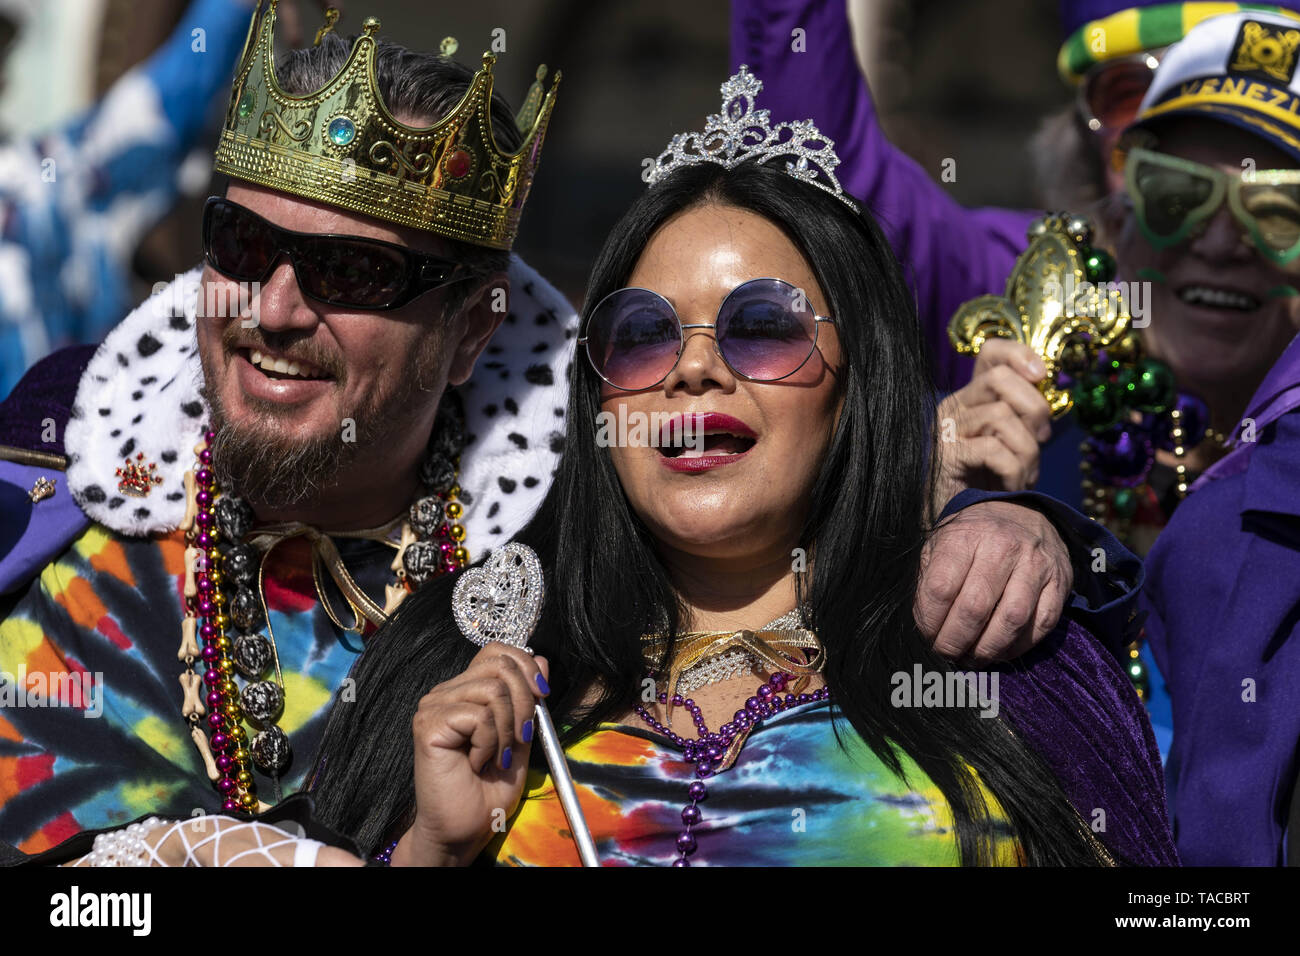 Los Angeles, USA. 23rd Feb, 2019. Participants are seen during the parade in Los Angeles.Mardi Gras also known as Fat Tuesday is a cultural Carnival that is celebrated throughout Latin America and in some places in the U.S. most famously in New Orleans. Credit: Ronen Tivony/SOPA Images/ZUMA Wire/Alamy Live News Stock Photo